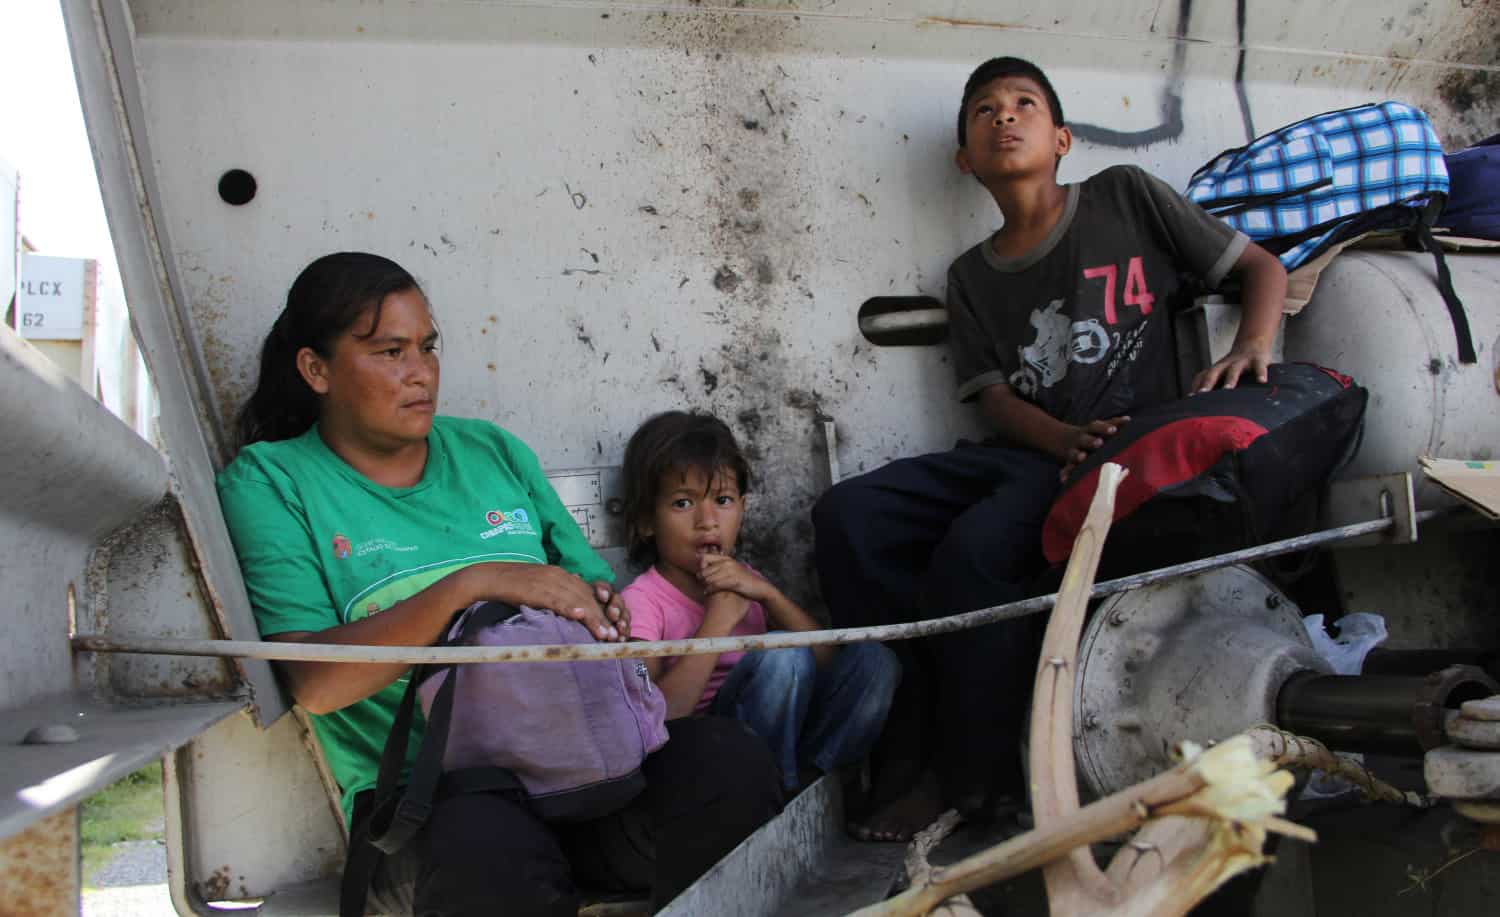 A Central American immigrant and her children sit inside the so-called 